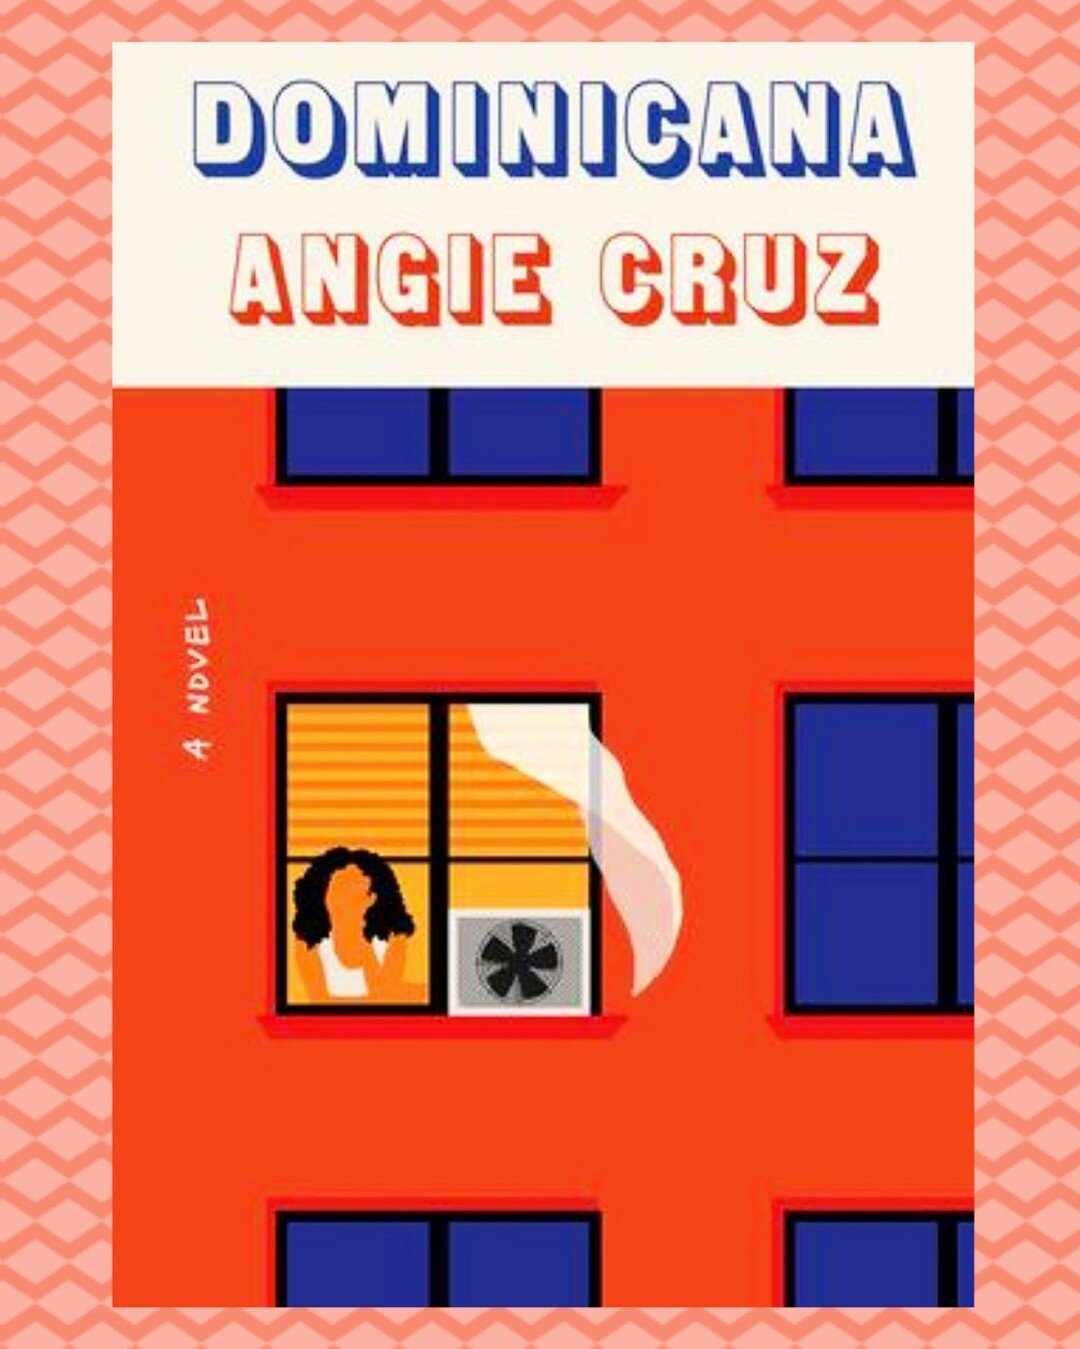 For the forth day of Christmas, here's a book for those seeking love and hope still in a seemingly hopeless world.

Forbidden romance, marginalisation, domestic abuse, new beginnings and its attendant challenges take centre stage in Angie Cruz&rsquo;